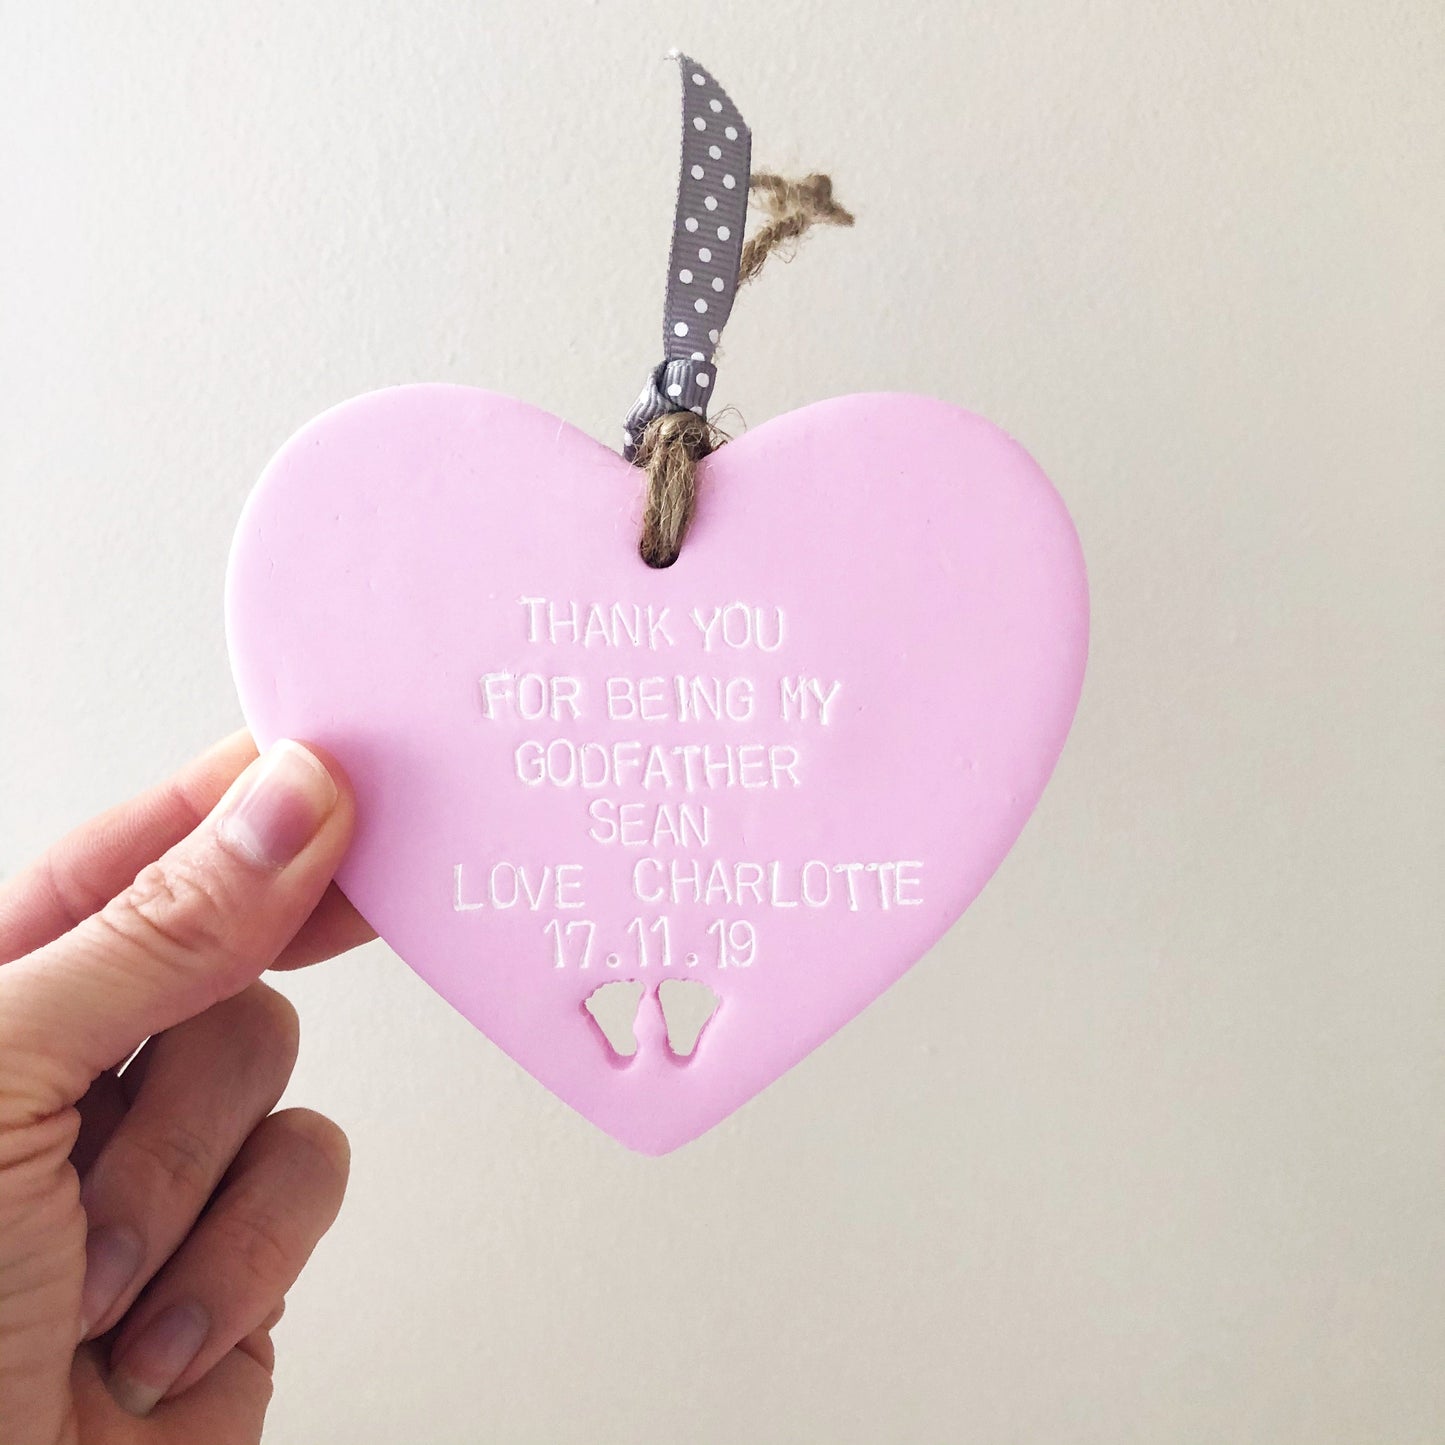 Personalised Godfather gift, pastel pink clay hanging heart with baby feet cut out of the bottom, the heart is personalised with THANK YOU FOR BEING MY GODFATHER SEAN LOVE CHARLOTTE 17.11.19